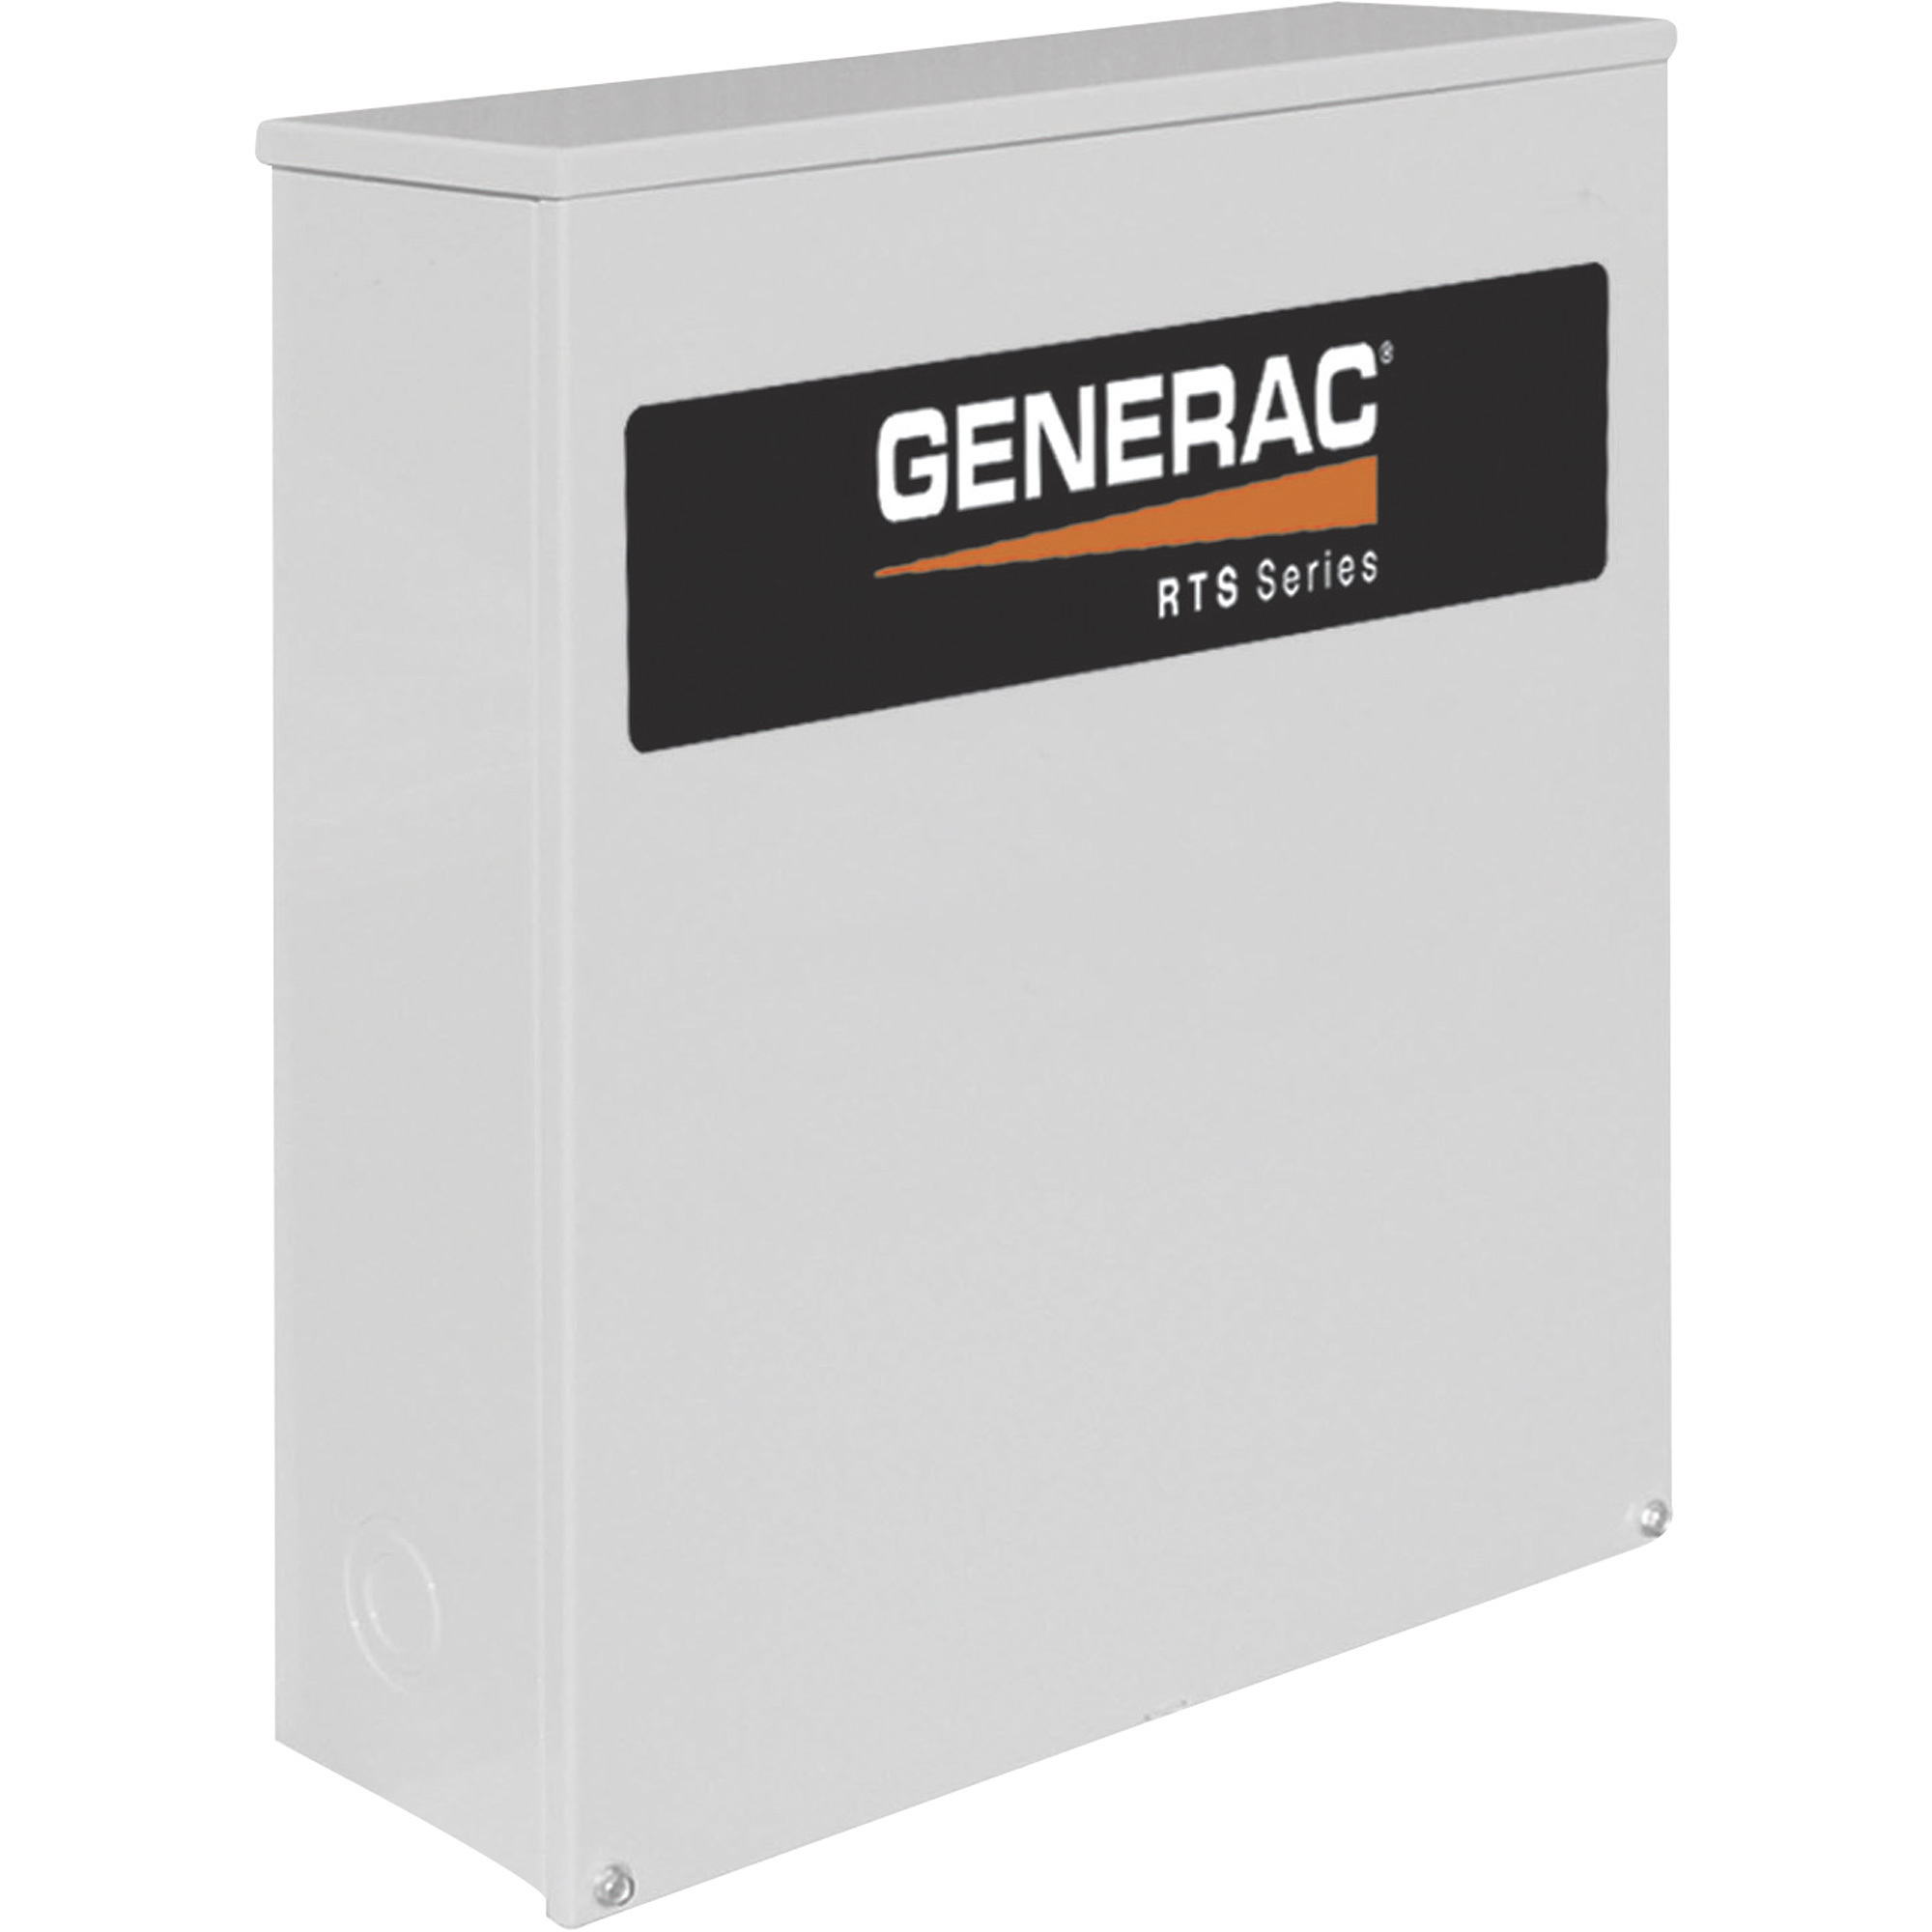 Generac RTS Automatic Generator Transfer Switch, 200 Amp, 277/480 Volts, 3 Phase, Type N, Model RTS-N-200K3